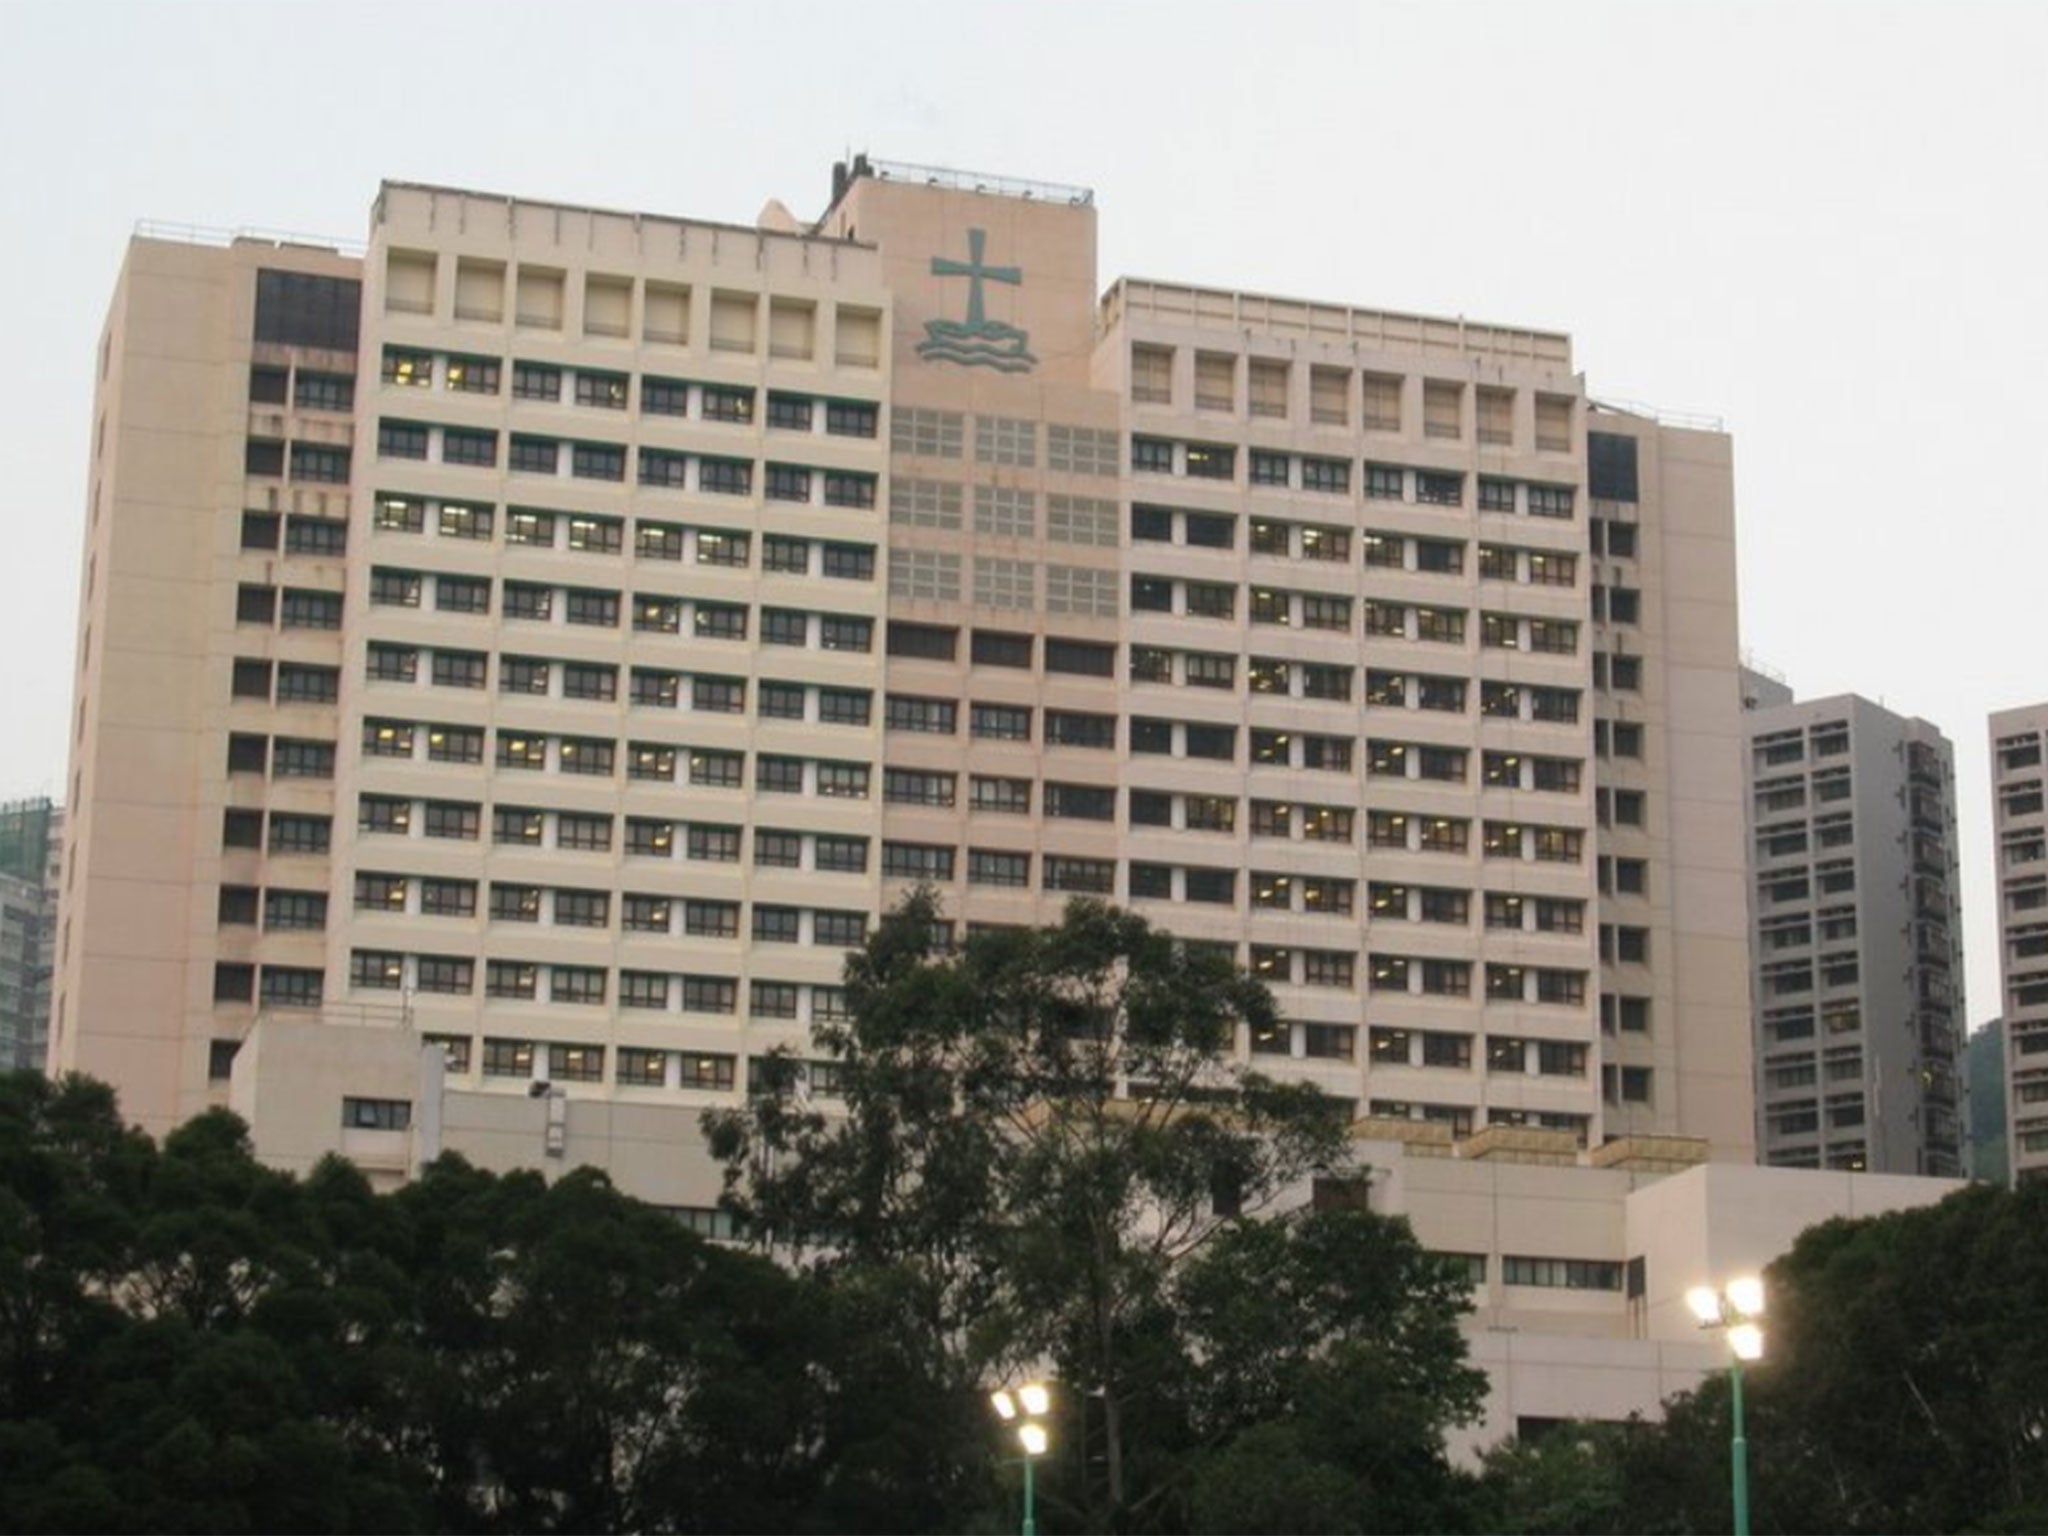 The man was admitted to the United Christian Hospital in Hong Kong